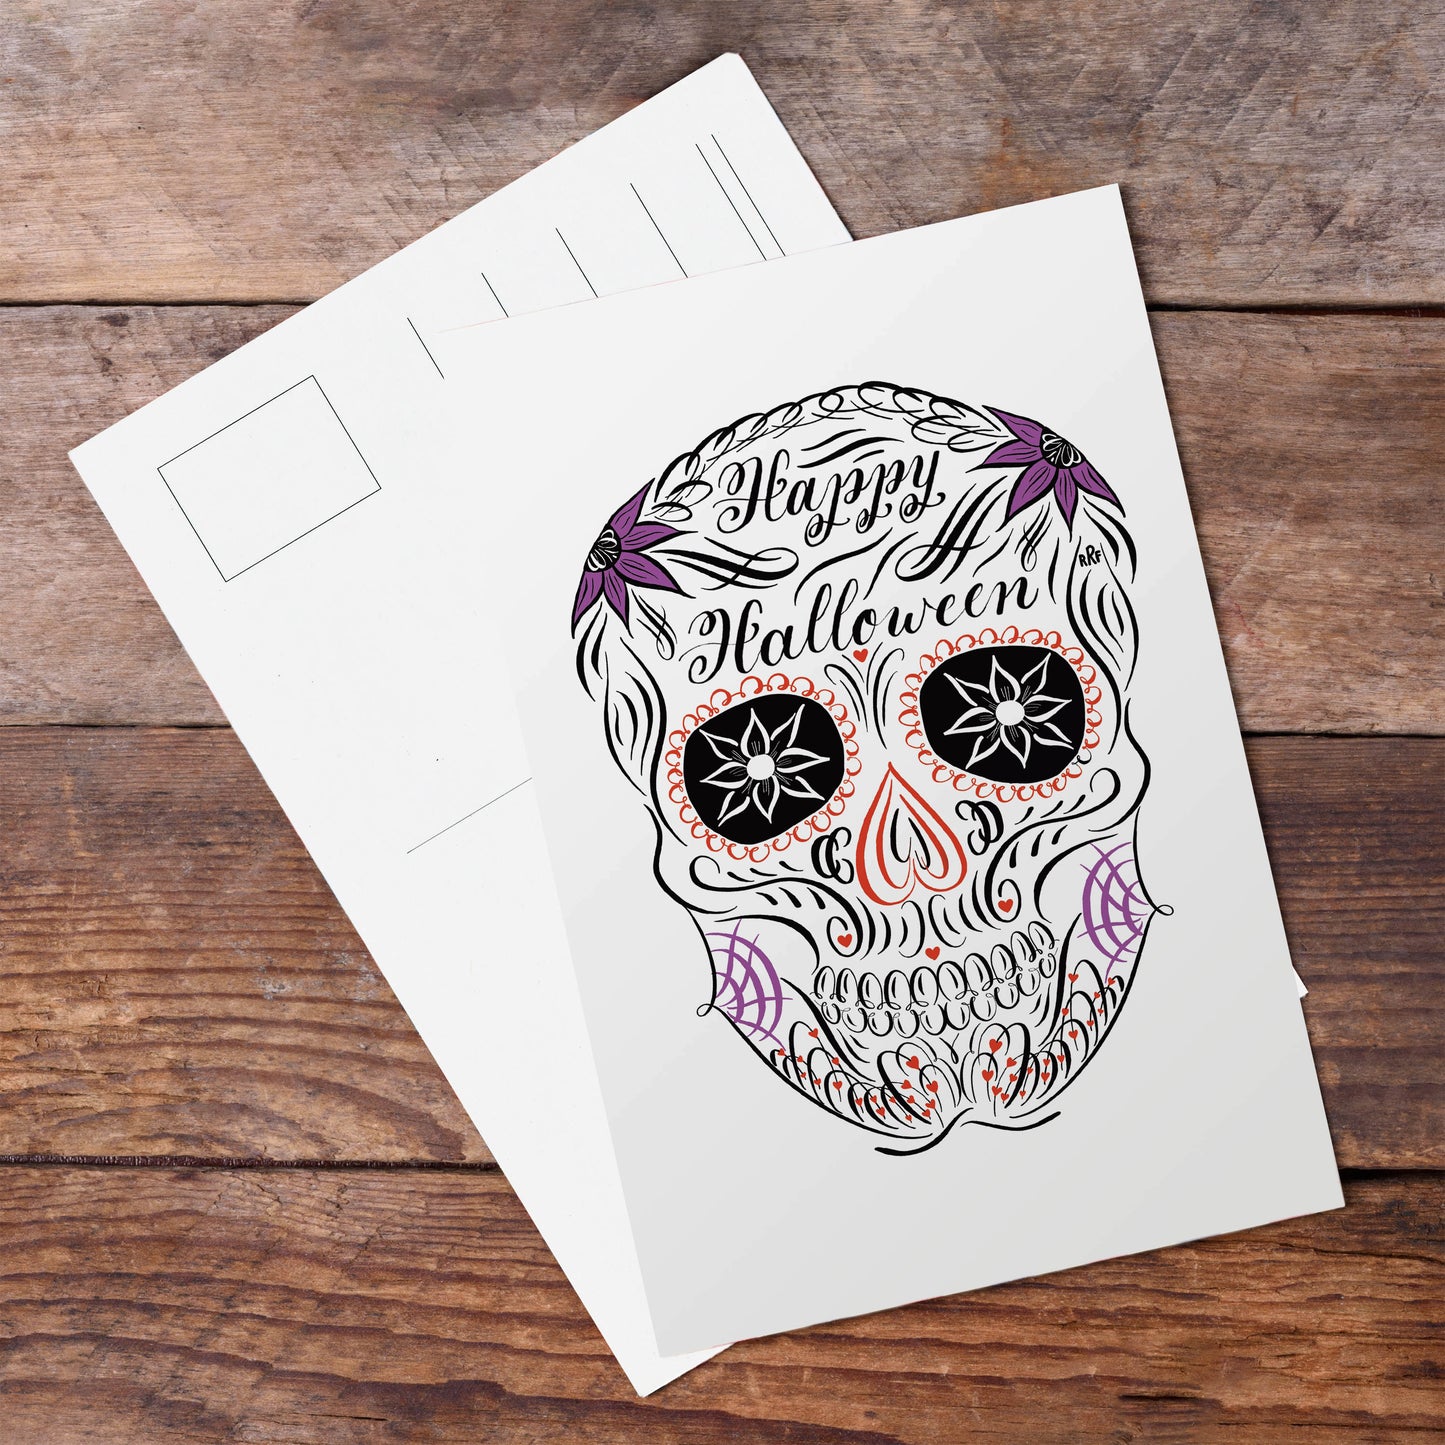 A lifestyle view of the halloween calligraphy postcard "sugar skull" design